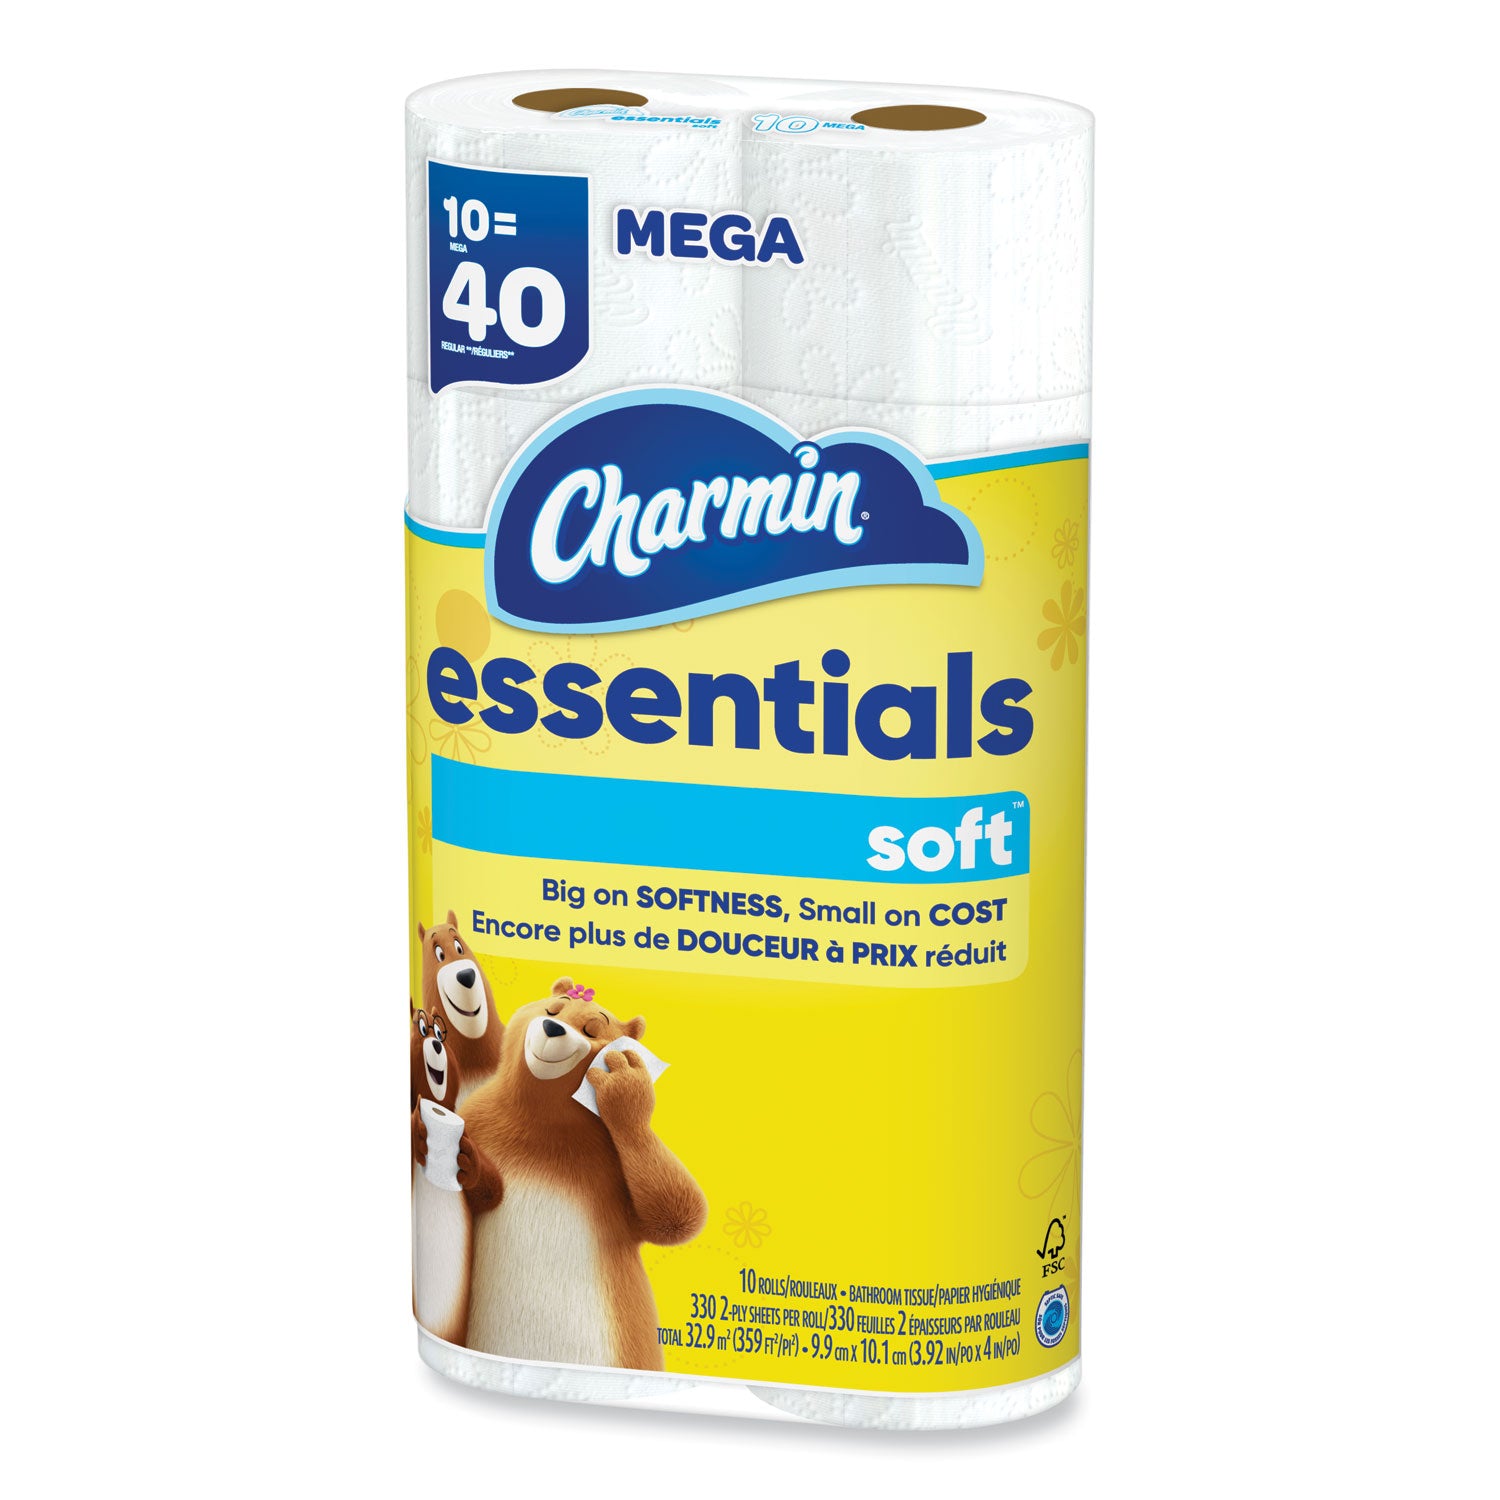 essentials-soft-bathroom-tissue-septic-safe-2-ply-white-352-sheets-roll-30-rolls-carton_pgc67355 - 6